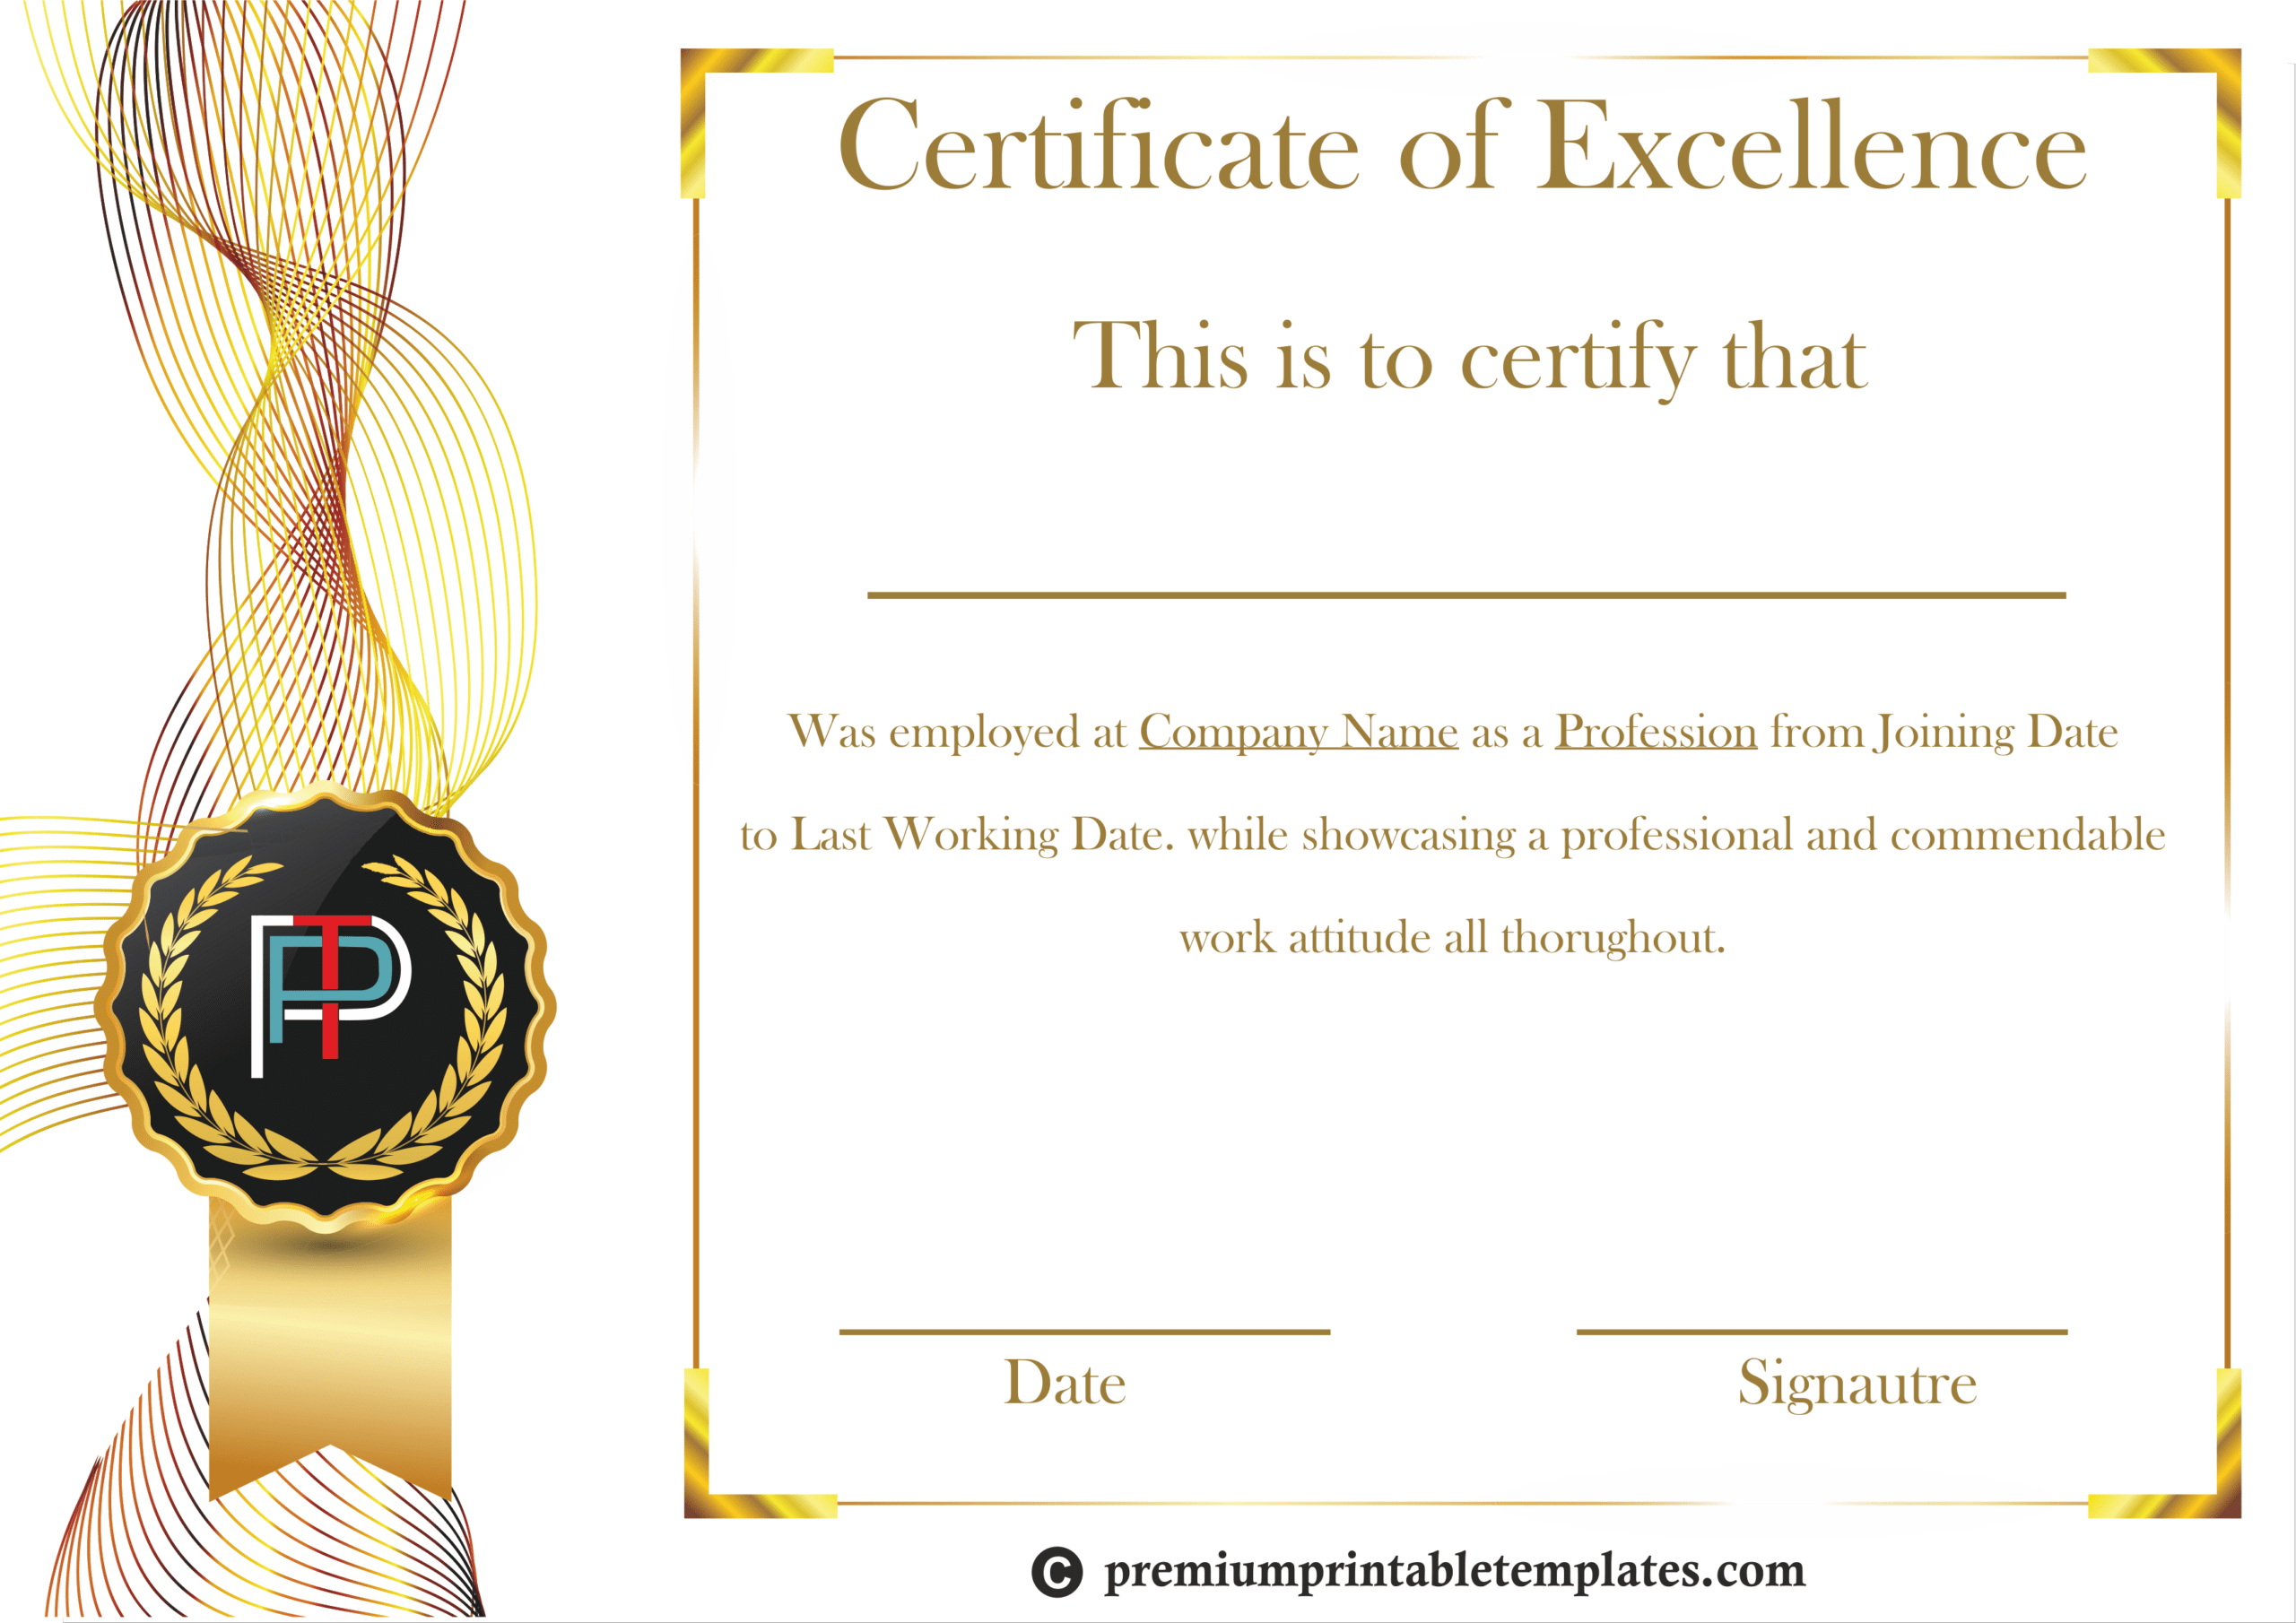 Certificate Of Excellence Template | Certificate Within Best Performance Certificate Template